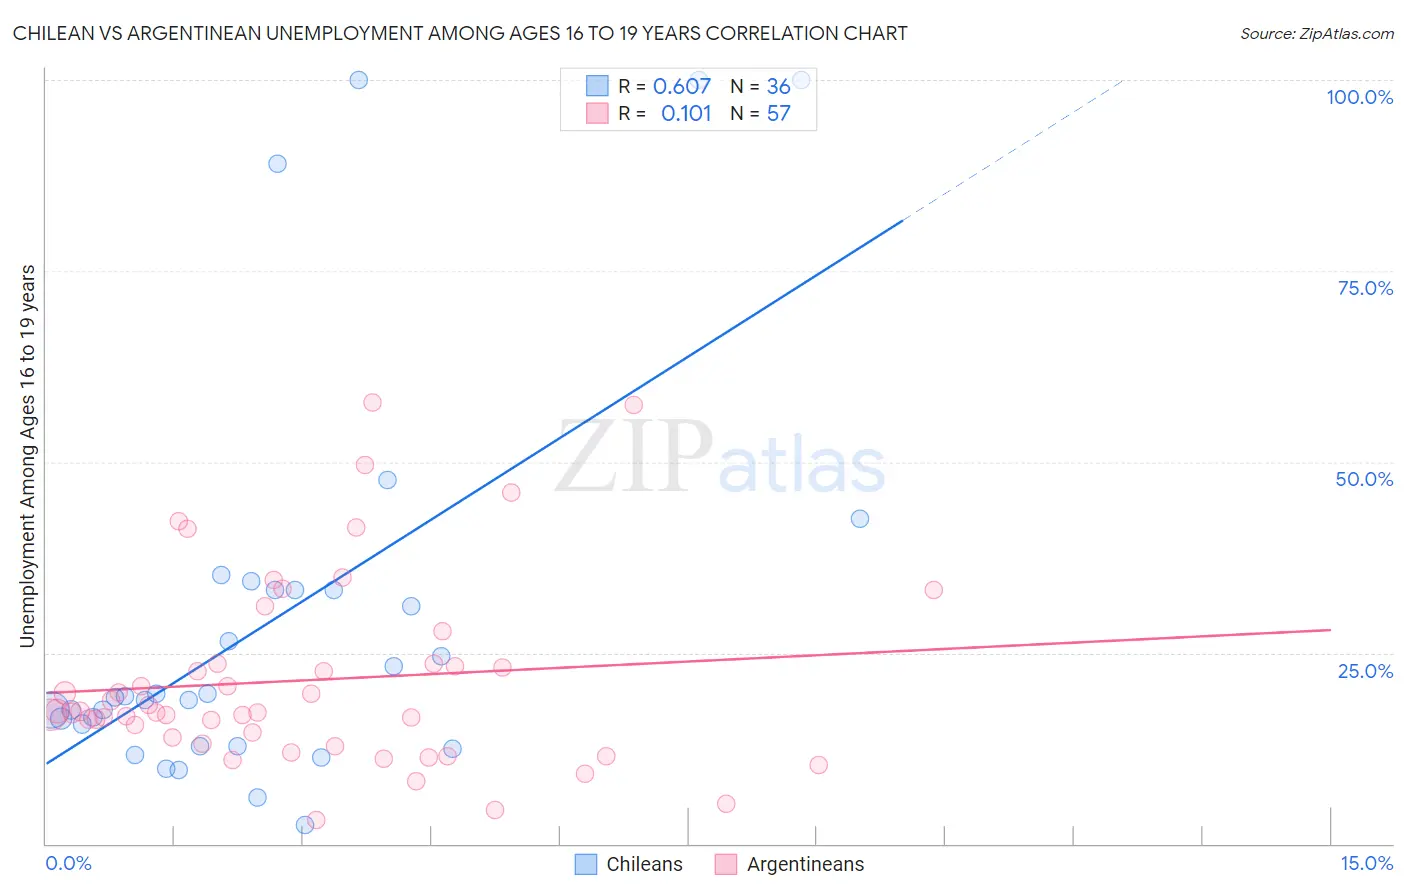 Chilean vs Argentinean Unemployment Among Ages 16 to 19 years